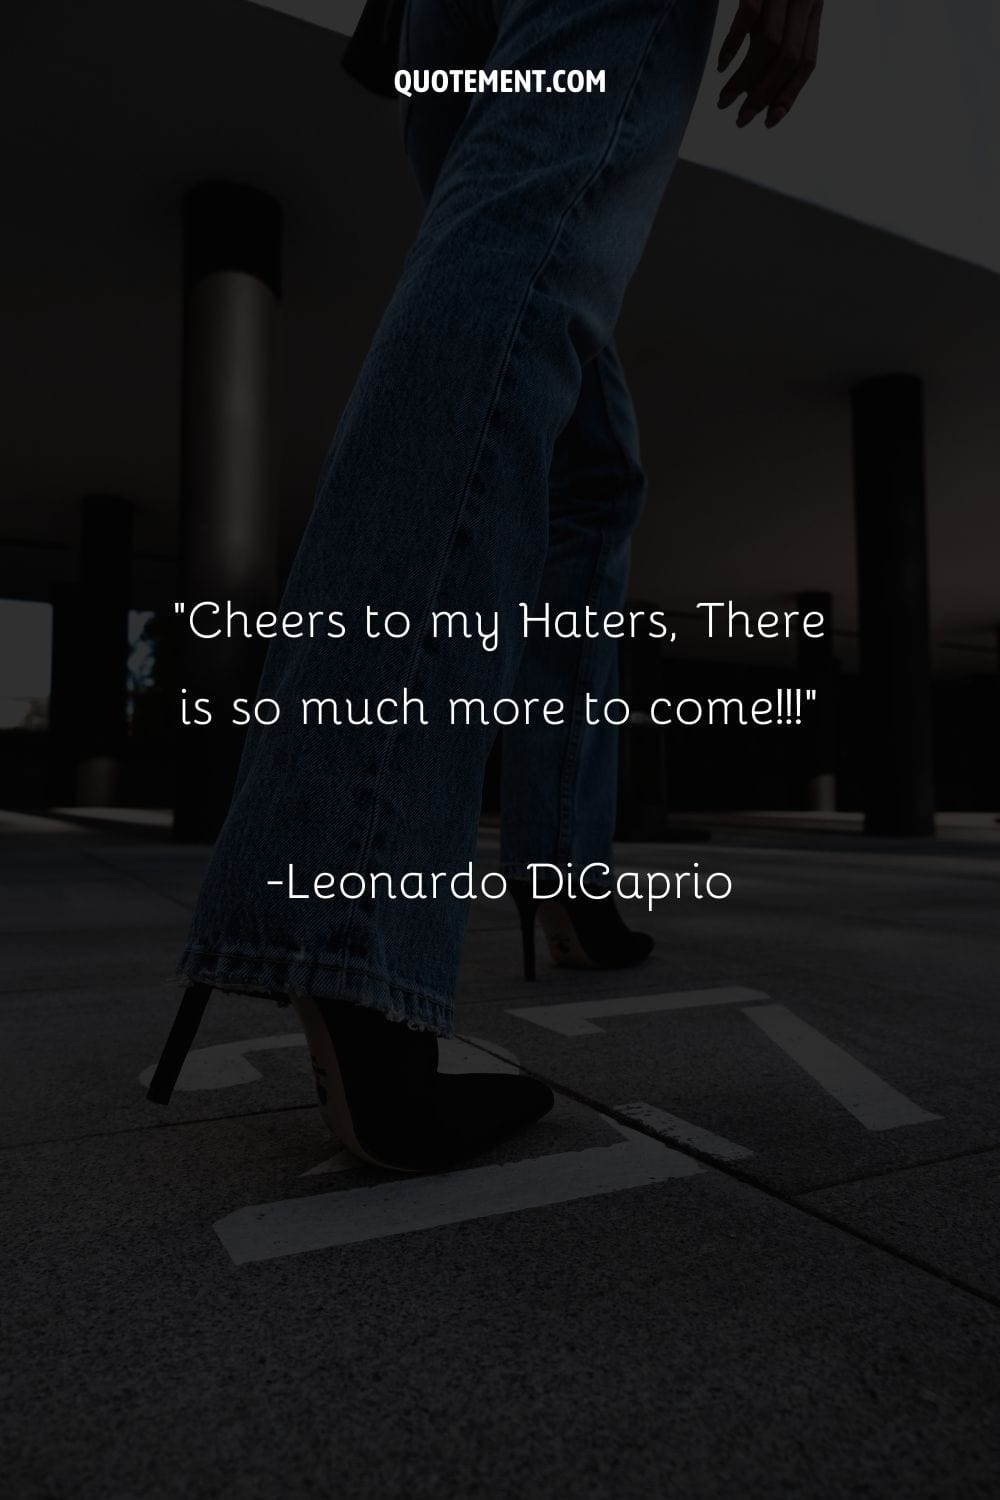 Image of a woman walking in jeans and heels representing quote on haters.
